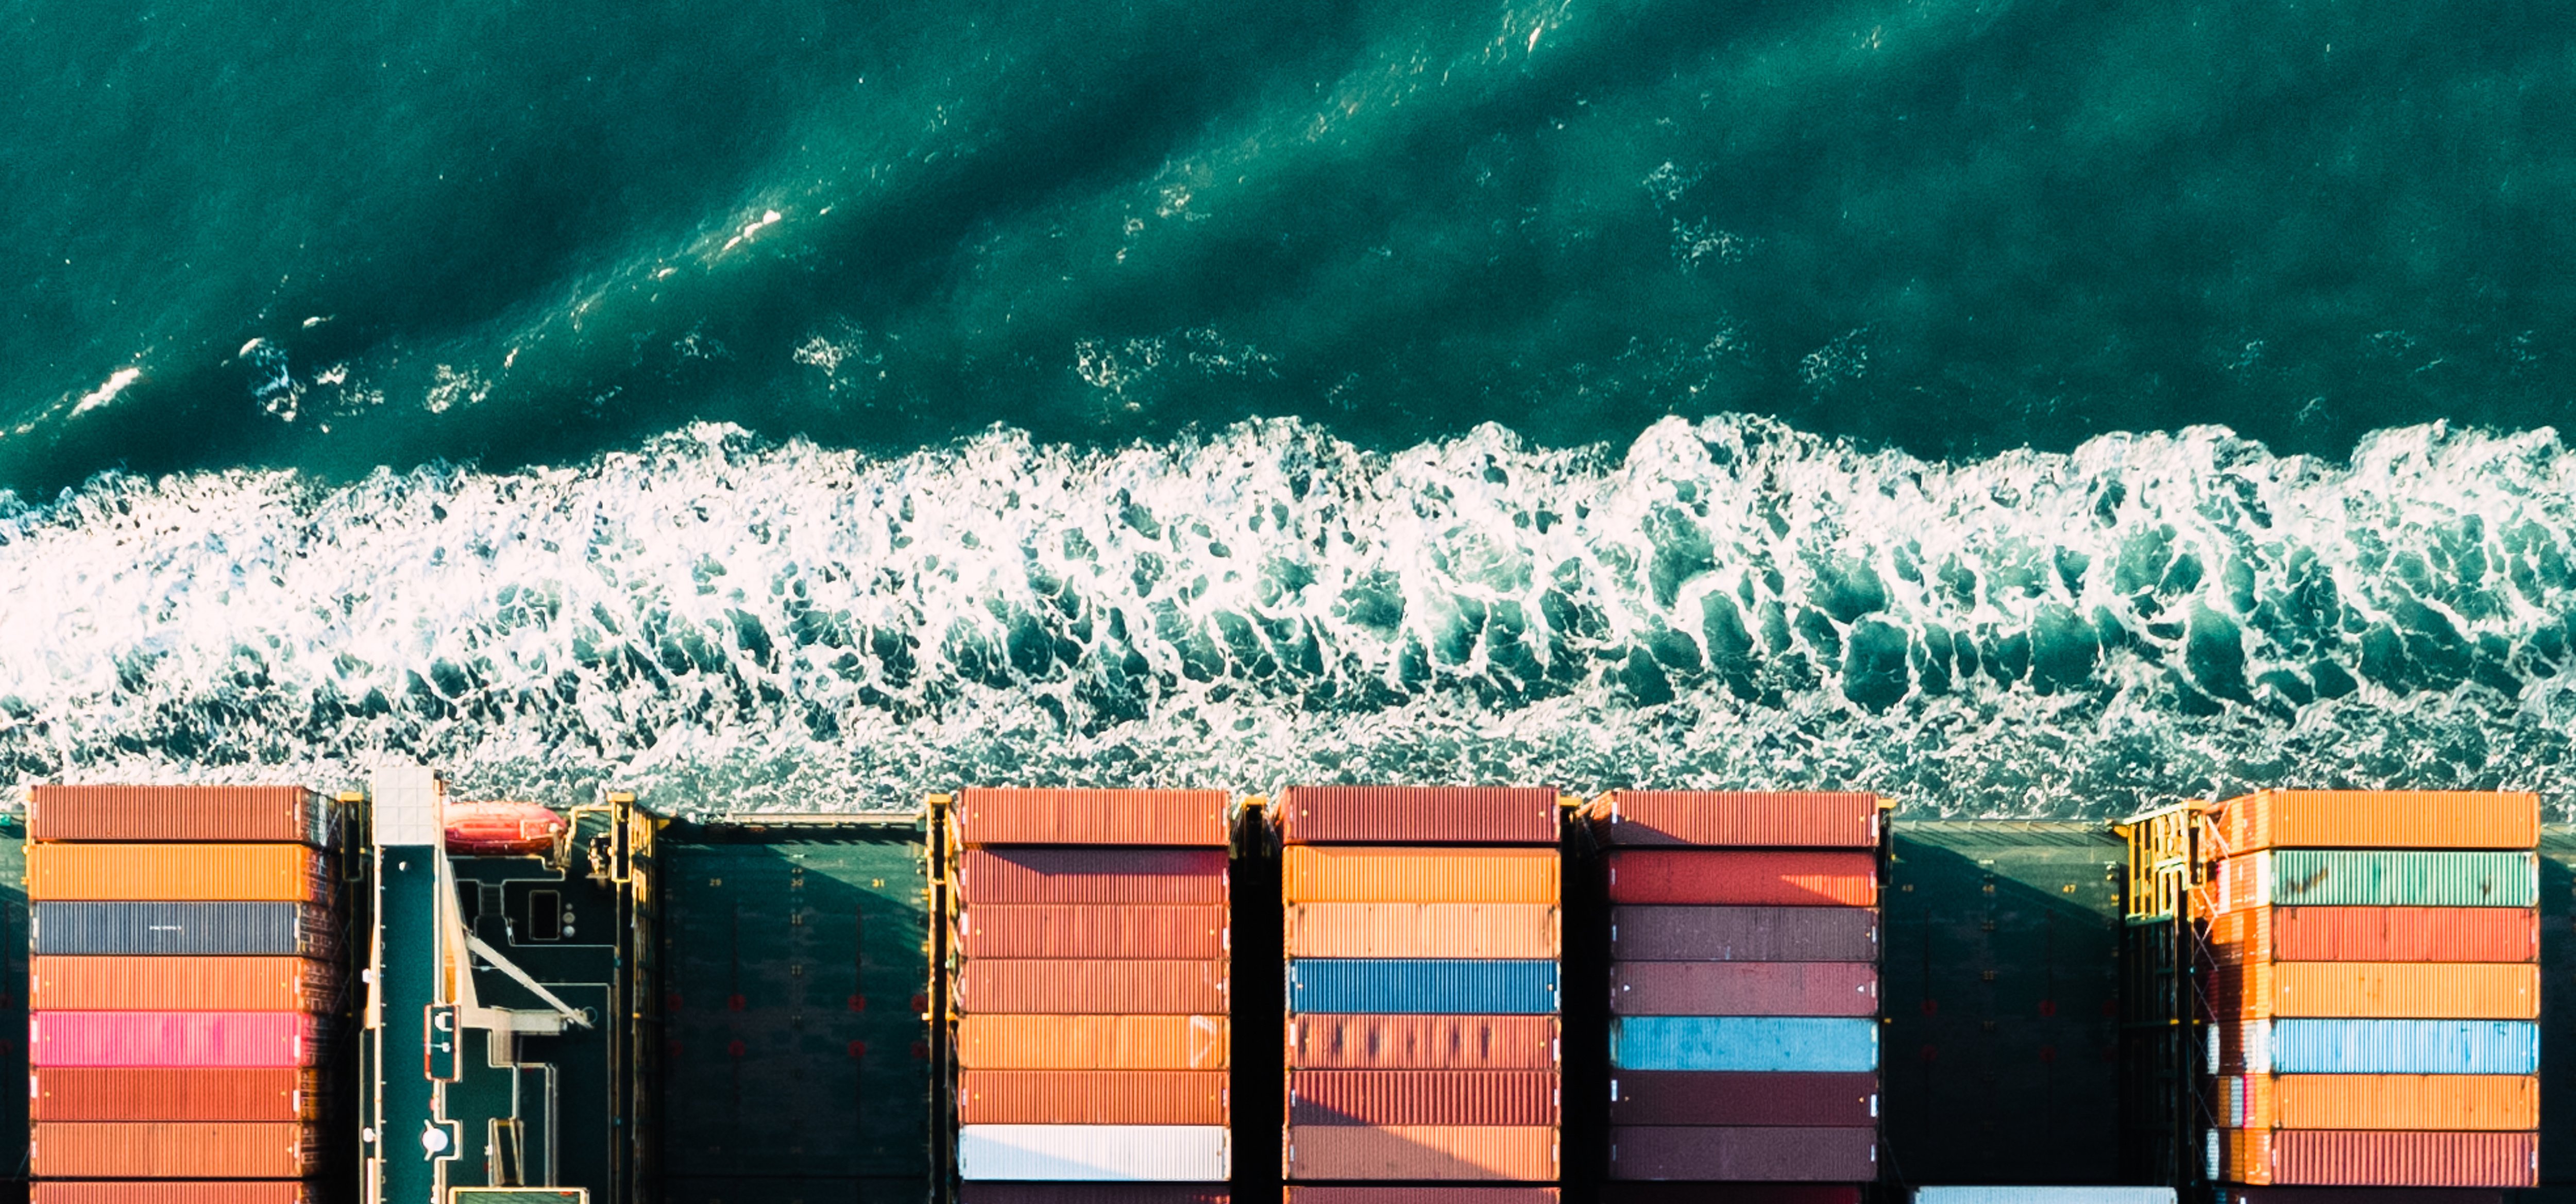 Shipping container at sea